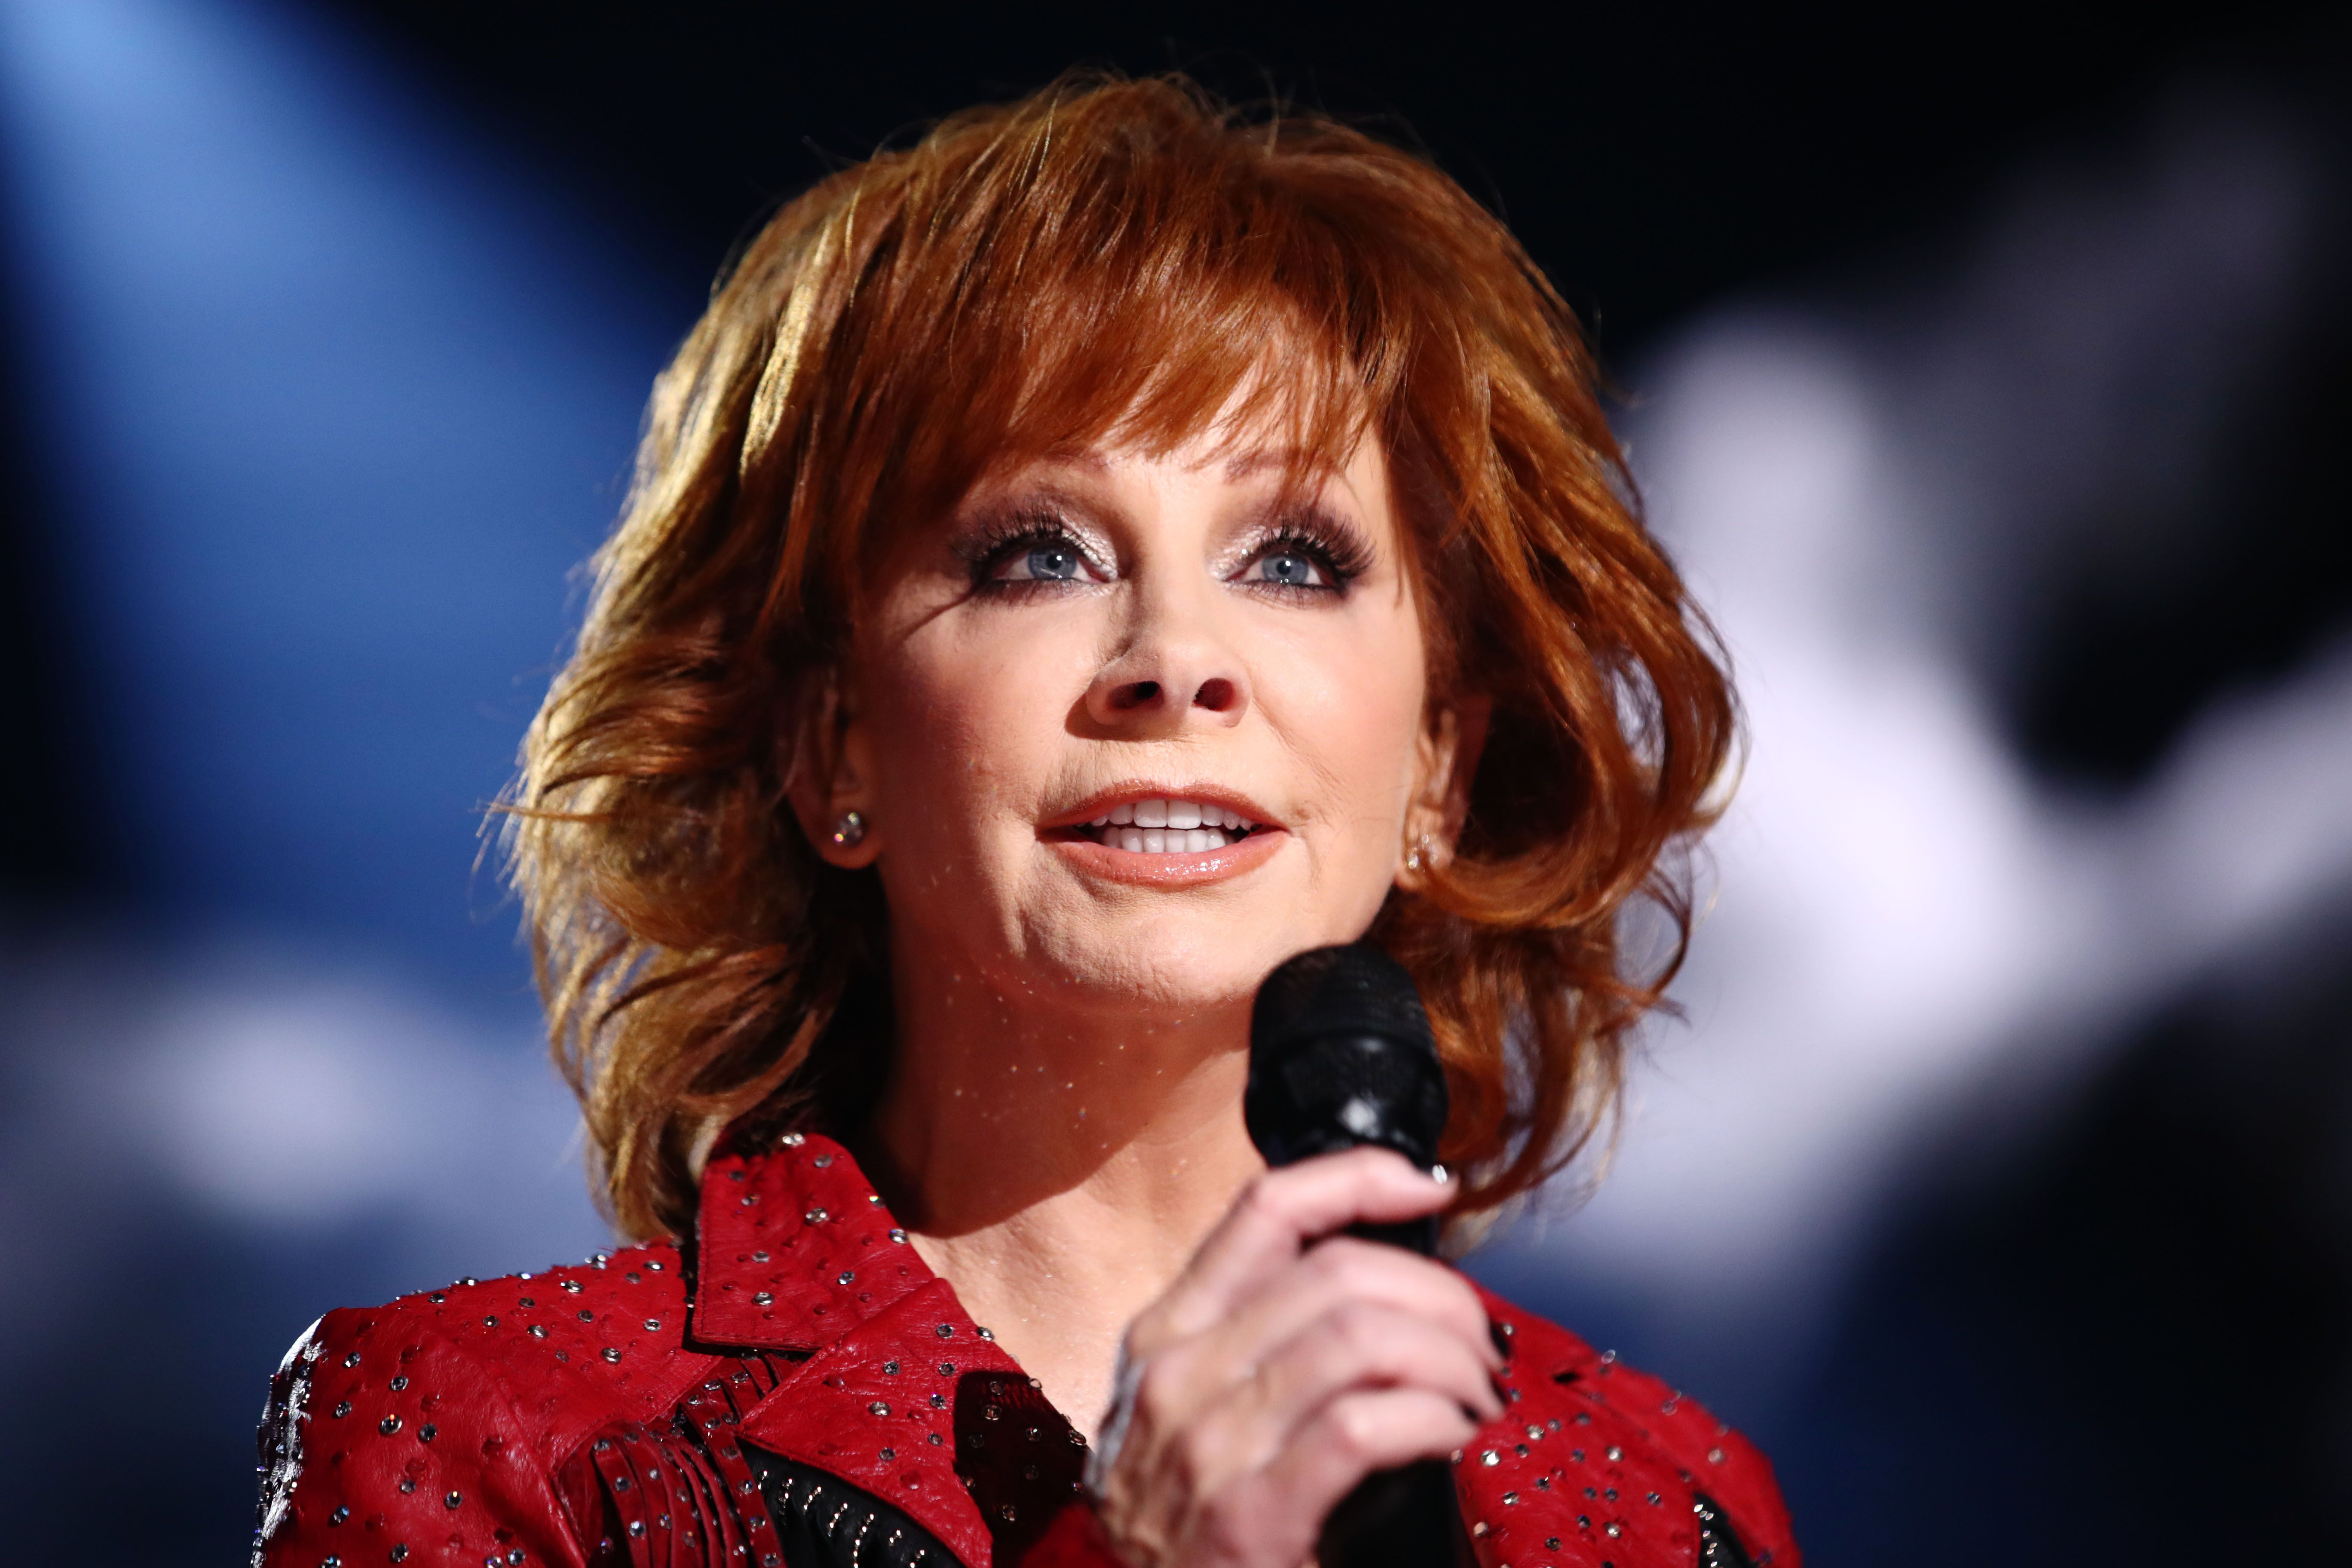 Reba McEntire performs at the Academy of Country Music Awards. | Source: Getty Images